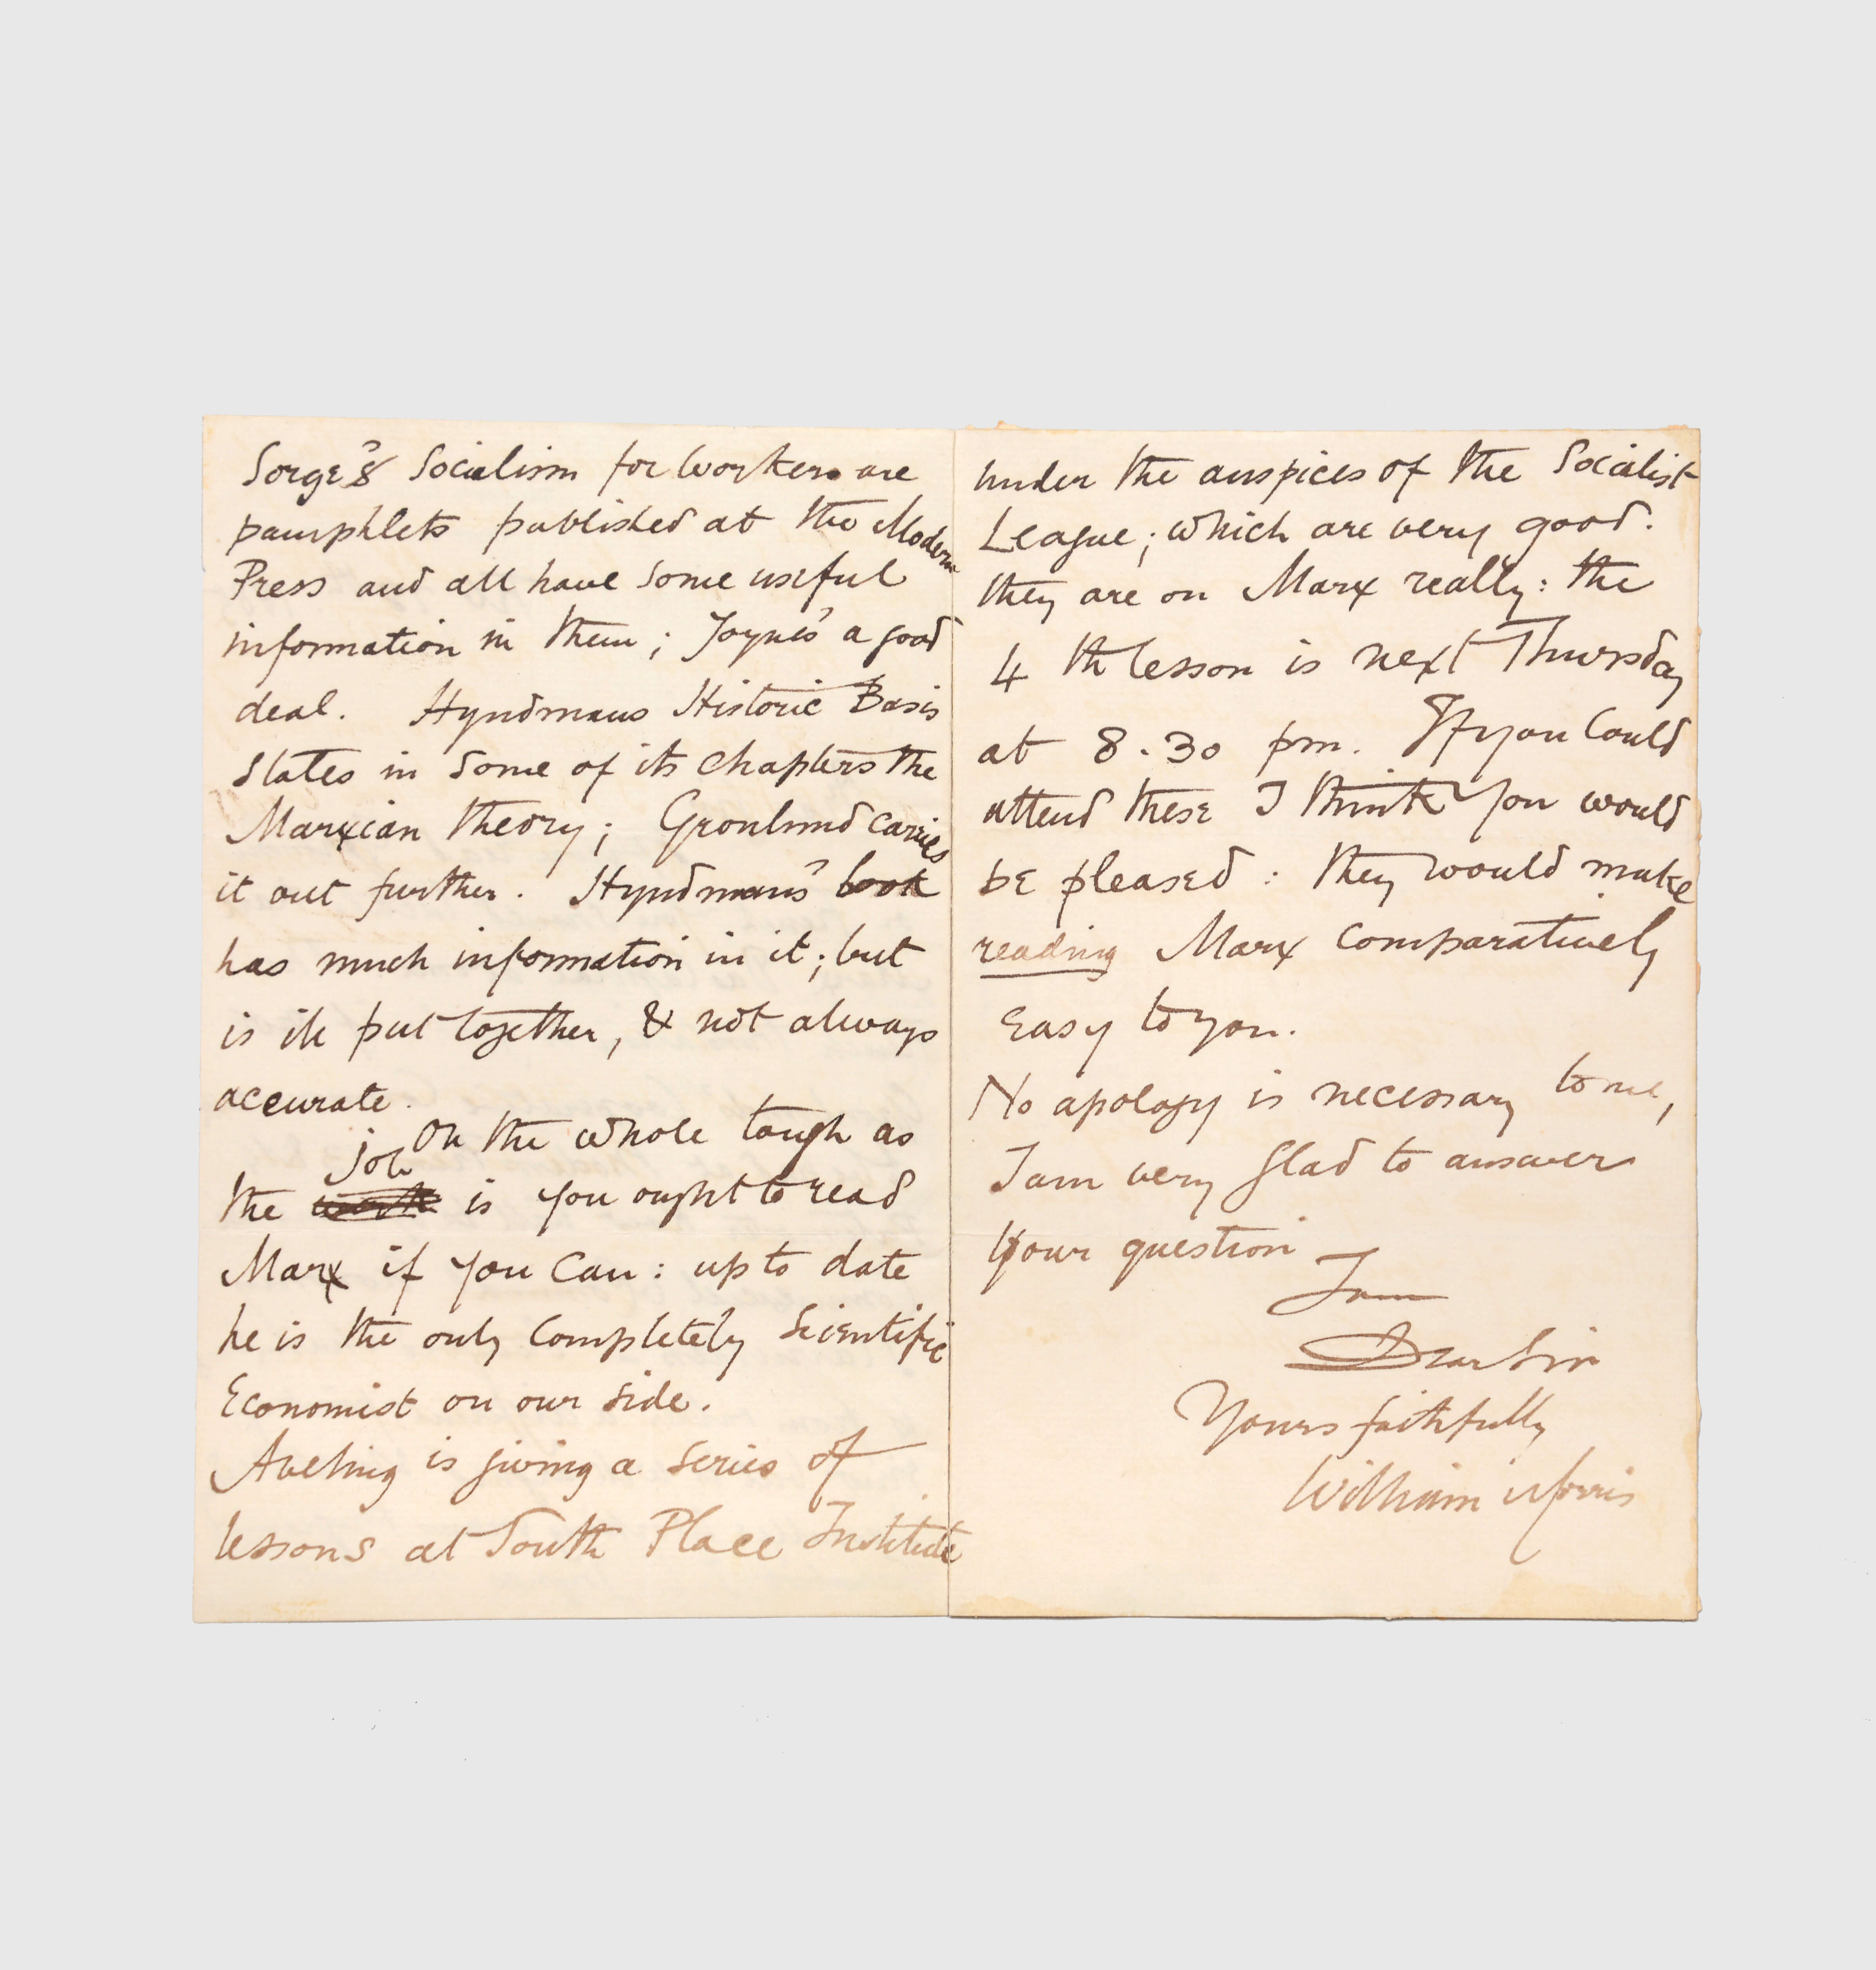 MORRIS, William. Autograph letter signed to an unknown correspondent ("Dear Sir"), recommending Marx's Das Kapital. Kelmscott House 28 February, 1885.